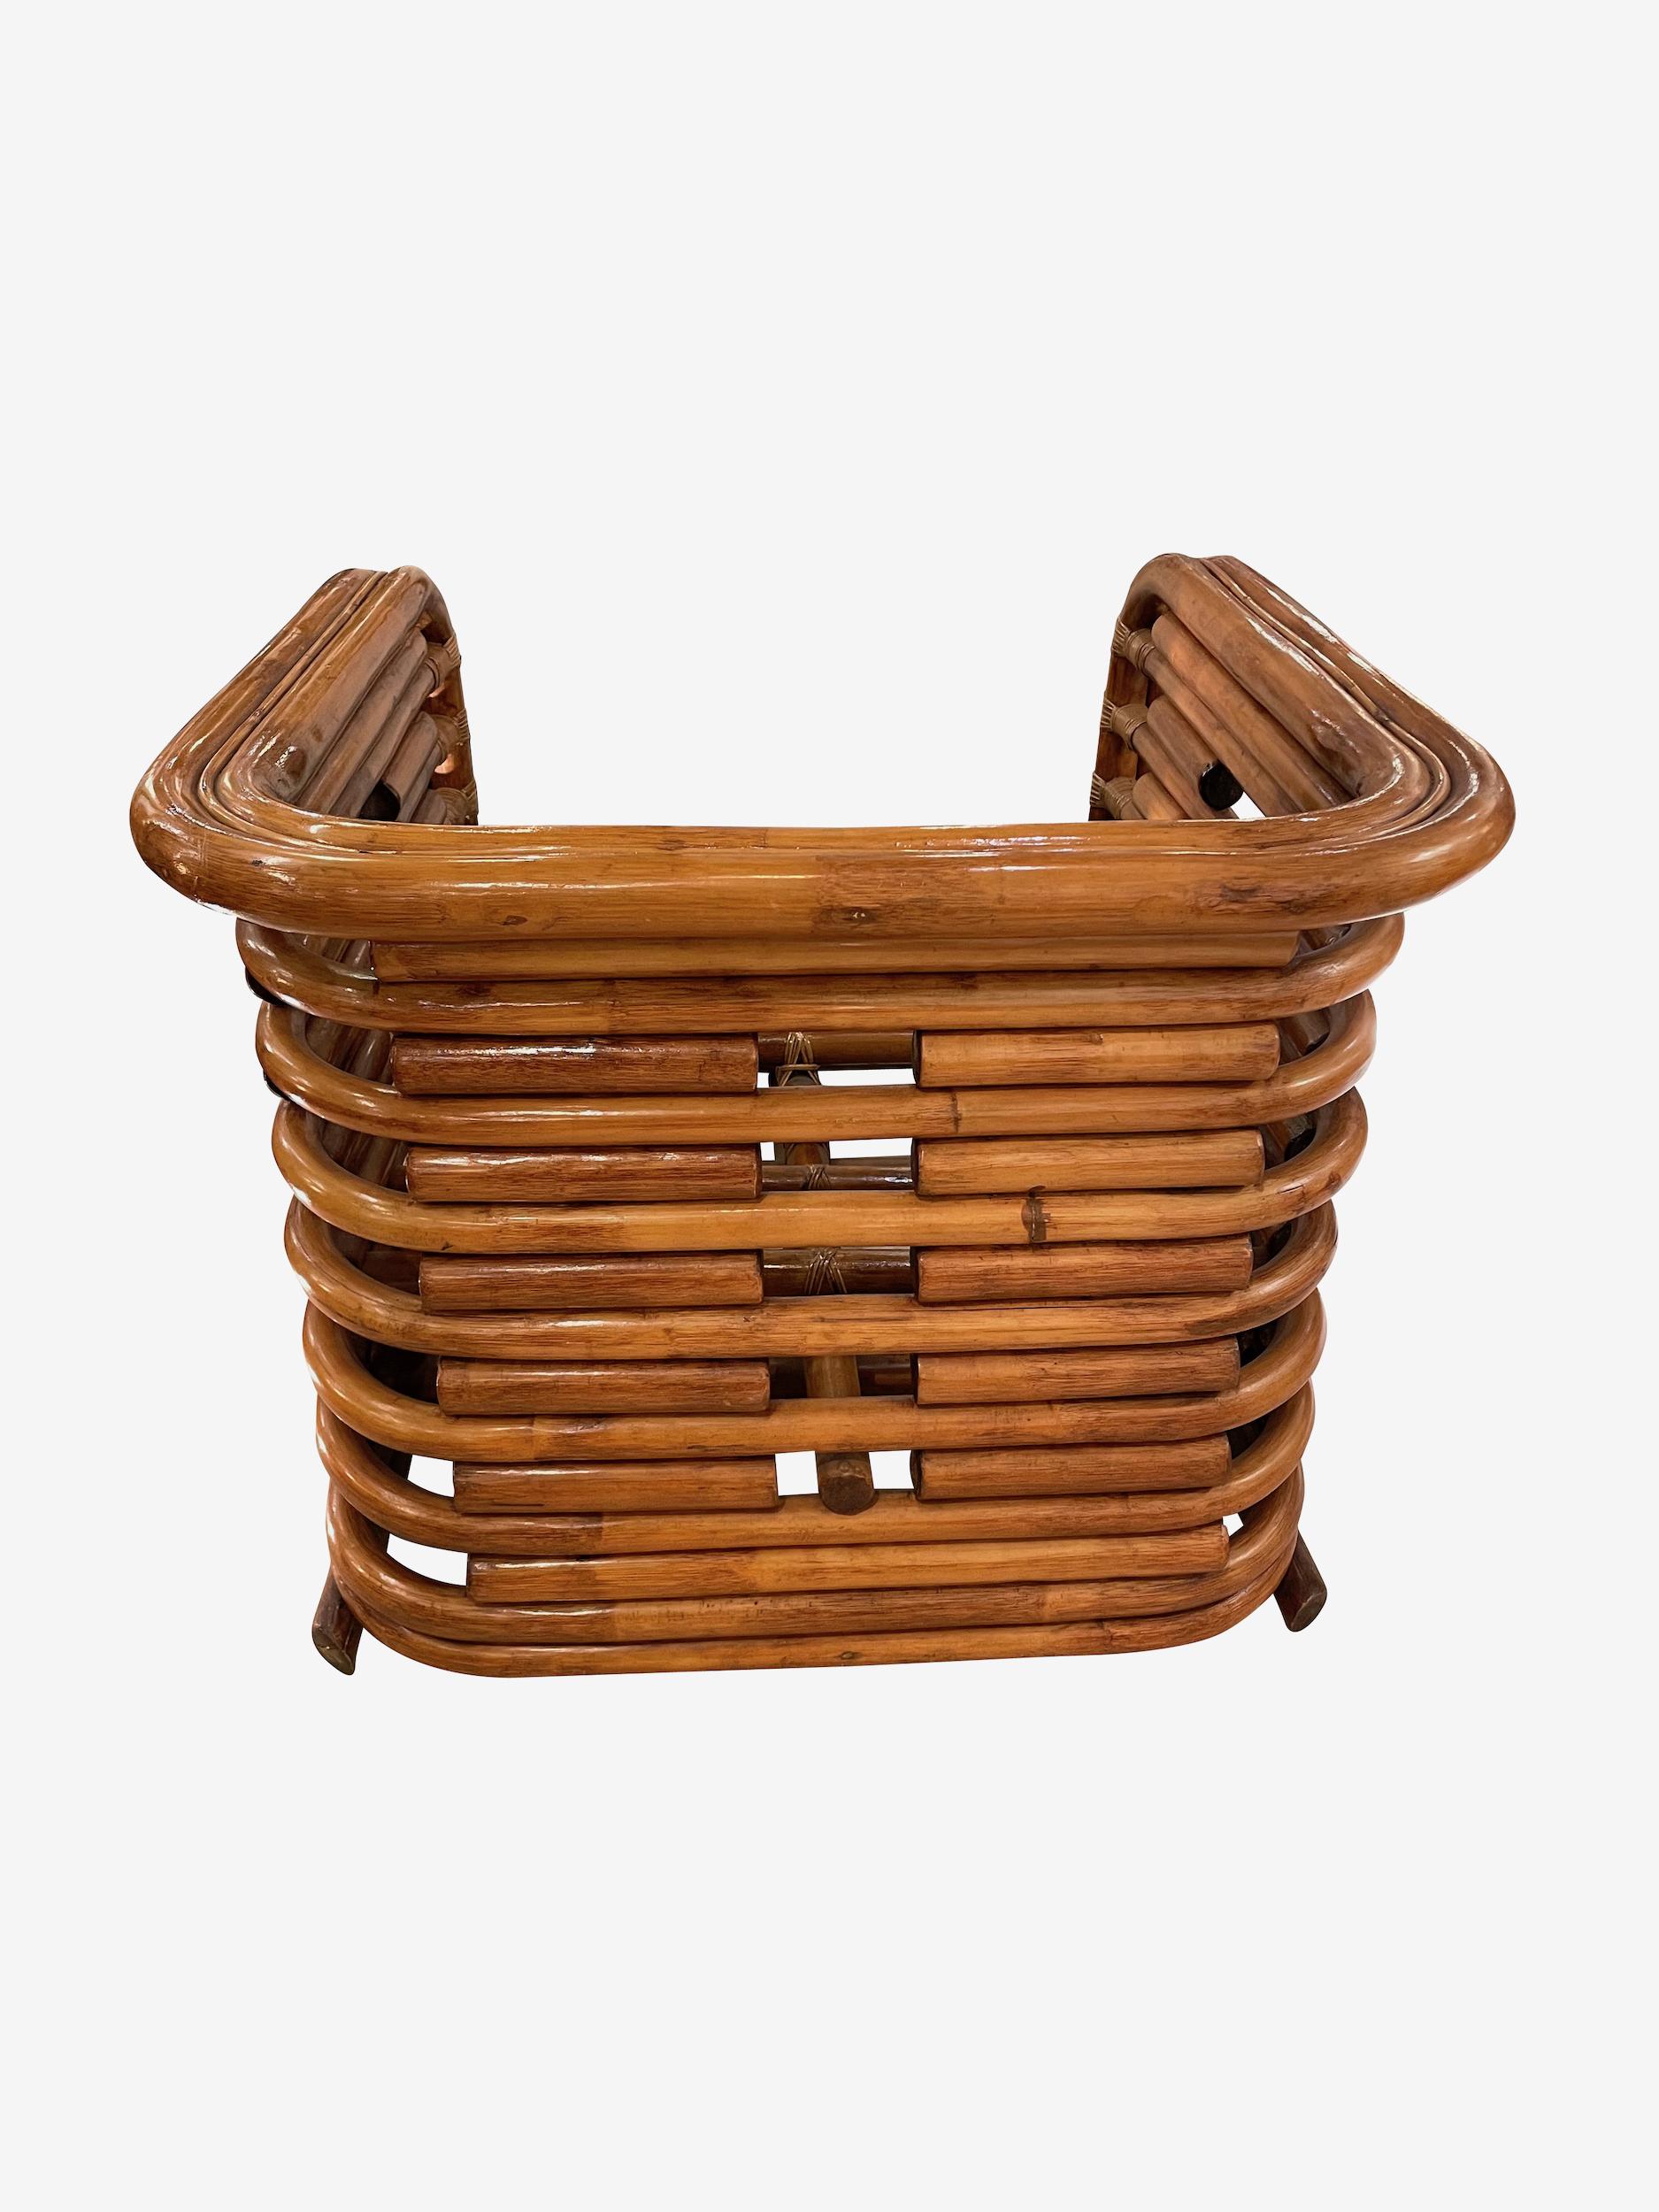 Rattan Set of Six Seating Set, France, 1950s For Sale 6